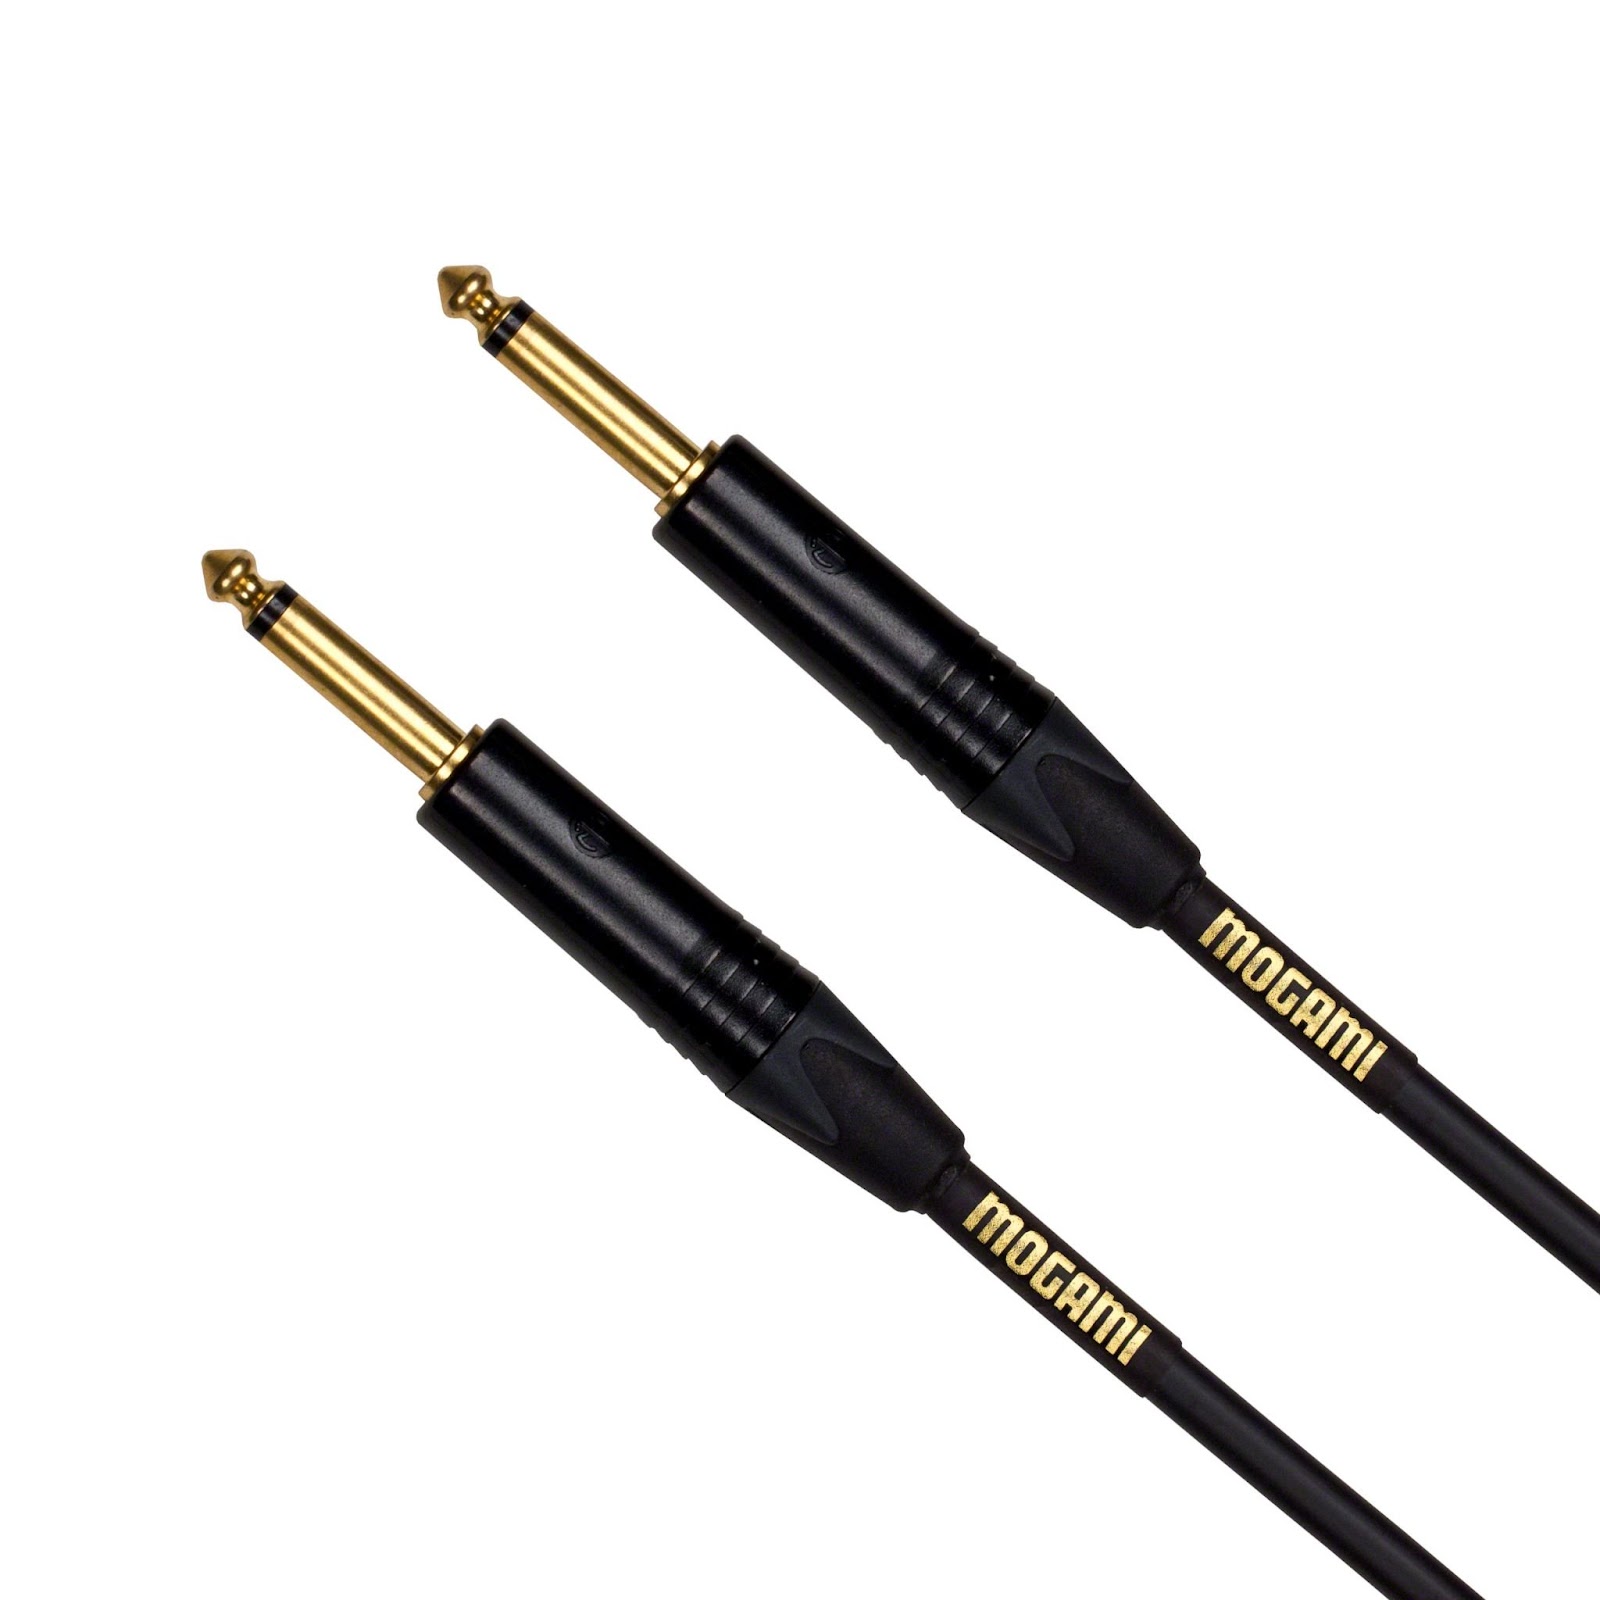 Amazon.com: Mogami Gold INSTRUMENT-10 Guitar Instrument Cable, 1/4" TS Male  Plugs, Gold Contacts, Straight Connectors, 10 Foot : Musical Instruments